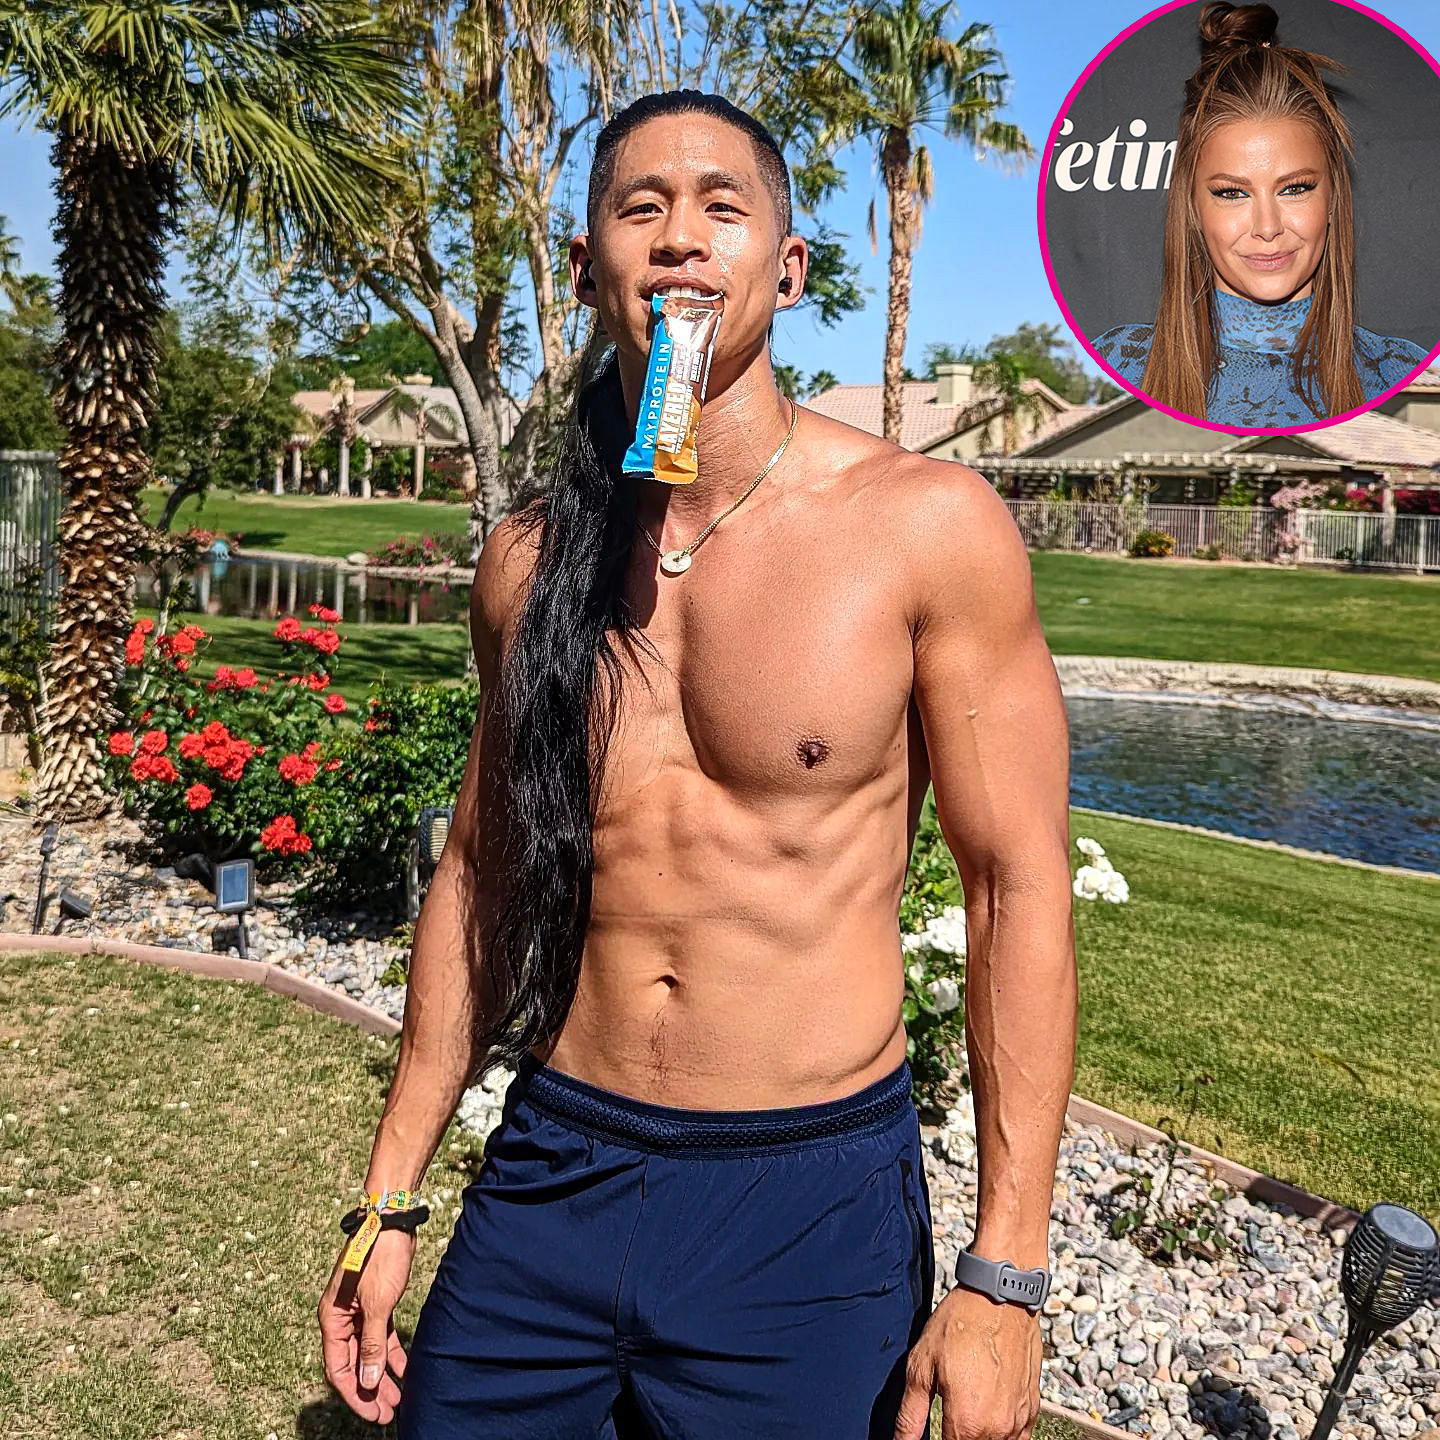 Who Is Daniel Wai? 5 Things to Know About the Guy Making Out With Ariana at Coachella - 148